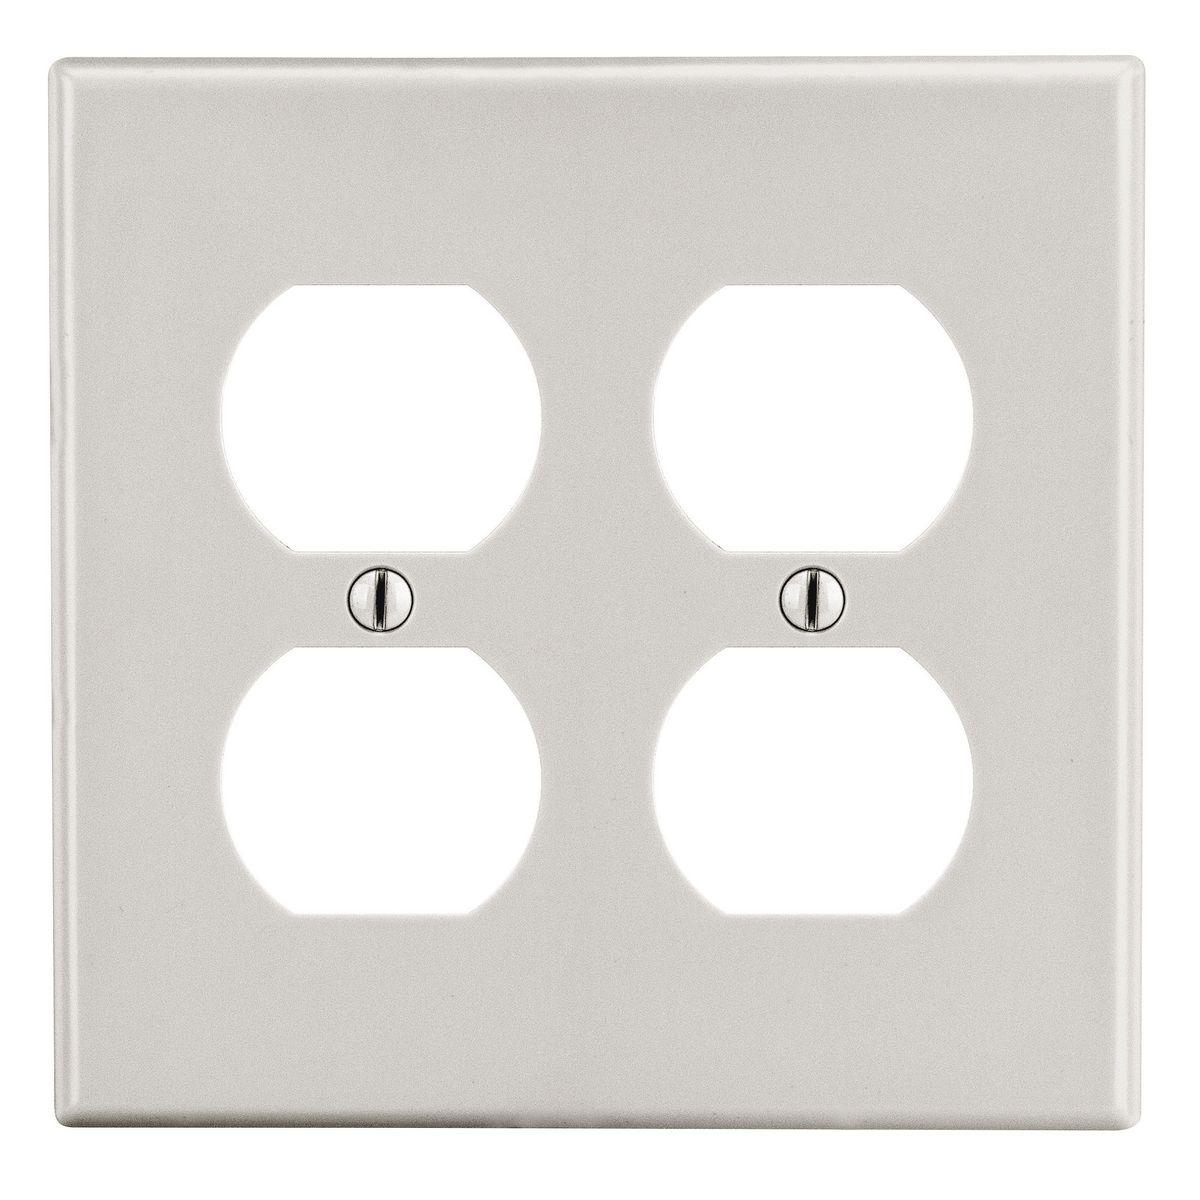 Hubbell PJ82LA Wallplate, Mid-Size 2-Gang, 2) Duplex, Light Almond  ; High-impact, self-extinguishing polycarbonate material ; More Rigid ; Sharp lines and less dimpling ; Smooth satin finish ; Blends into wall with an optimum finish ; Smooth Satin Finish